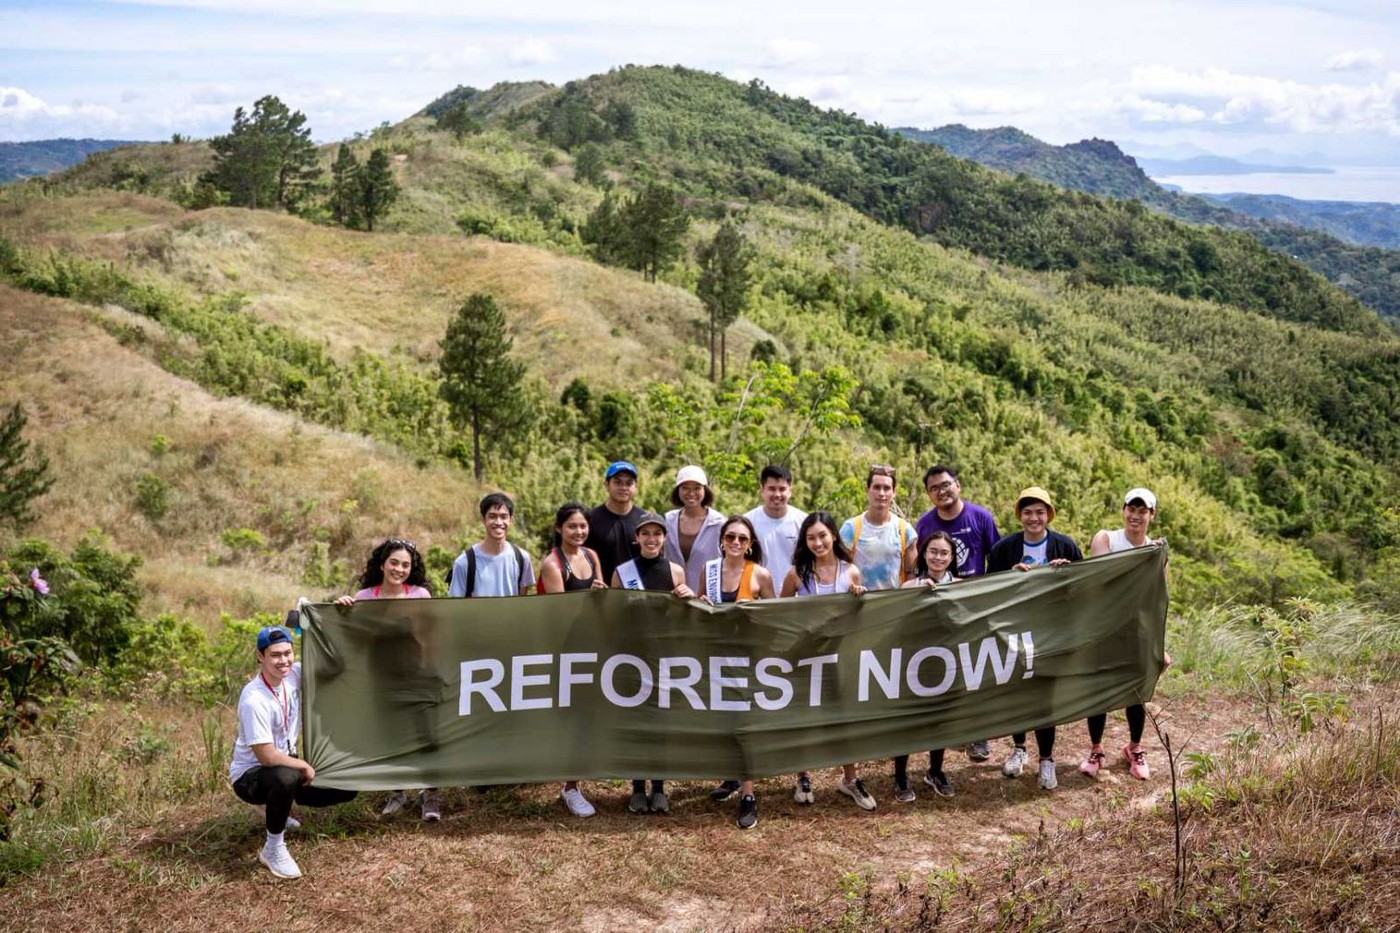 Reforest now!